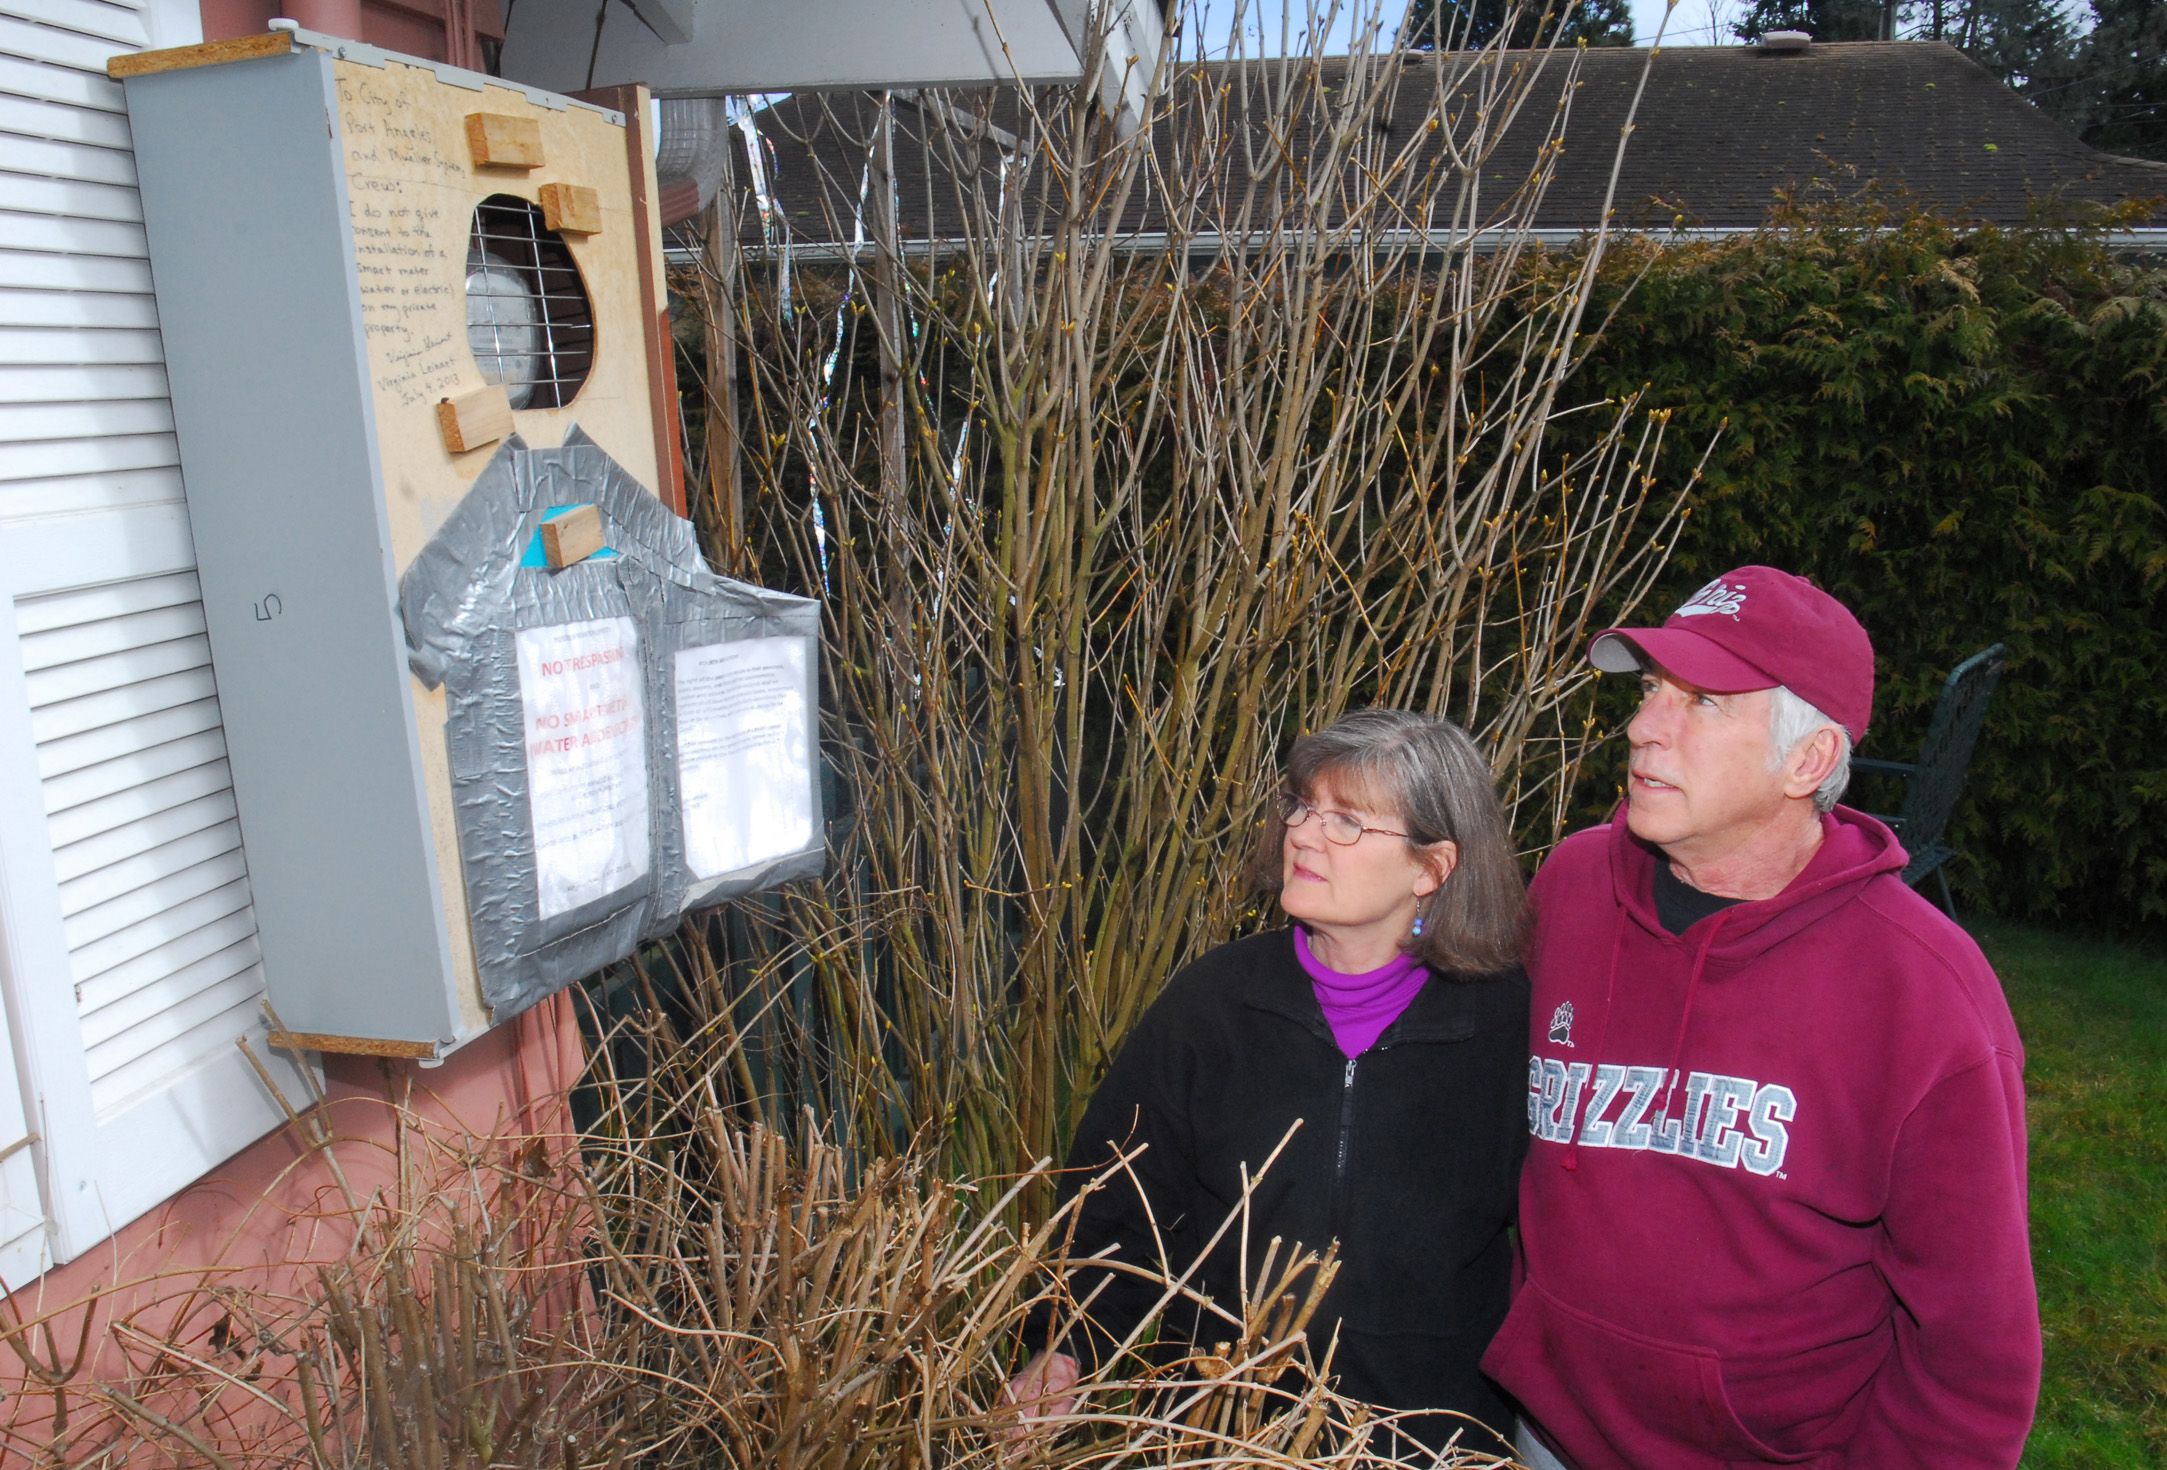 Virginia and Tom Leinart inspect a box they have built to enclose the electric meter at their home in Port Angeles.